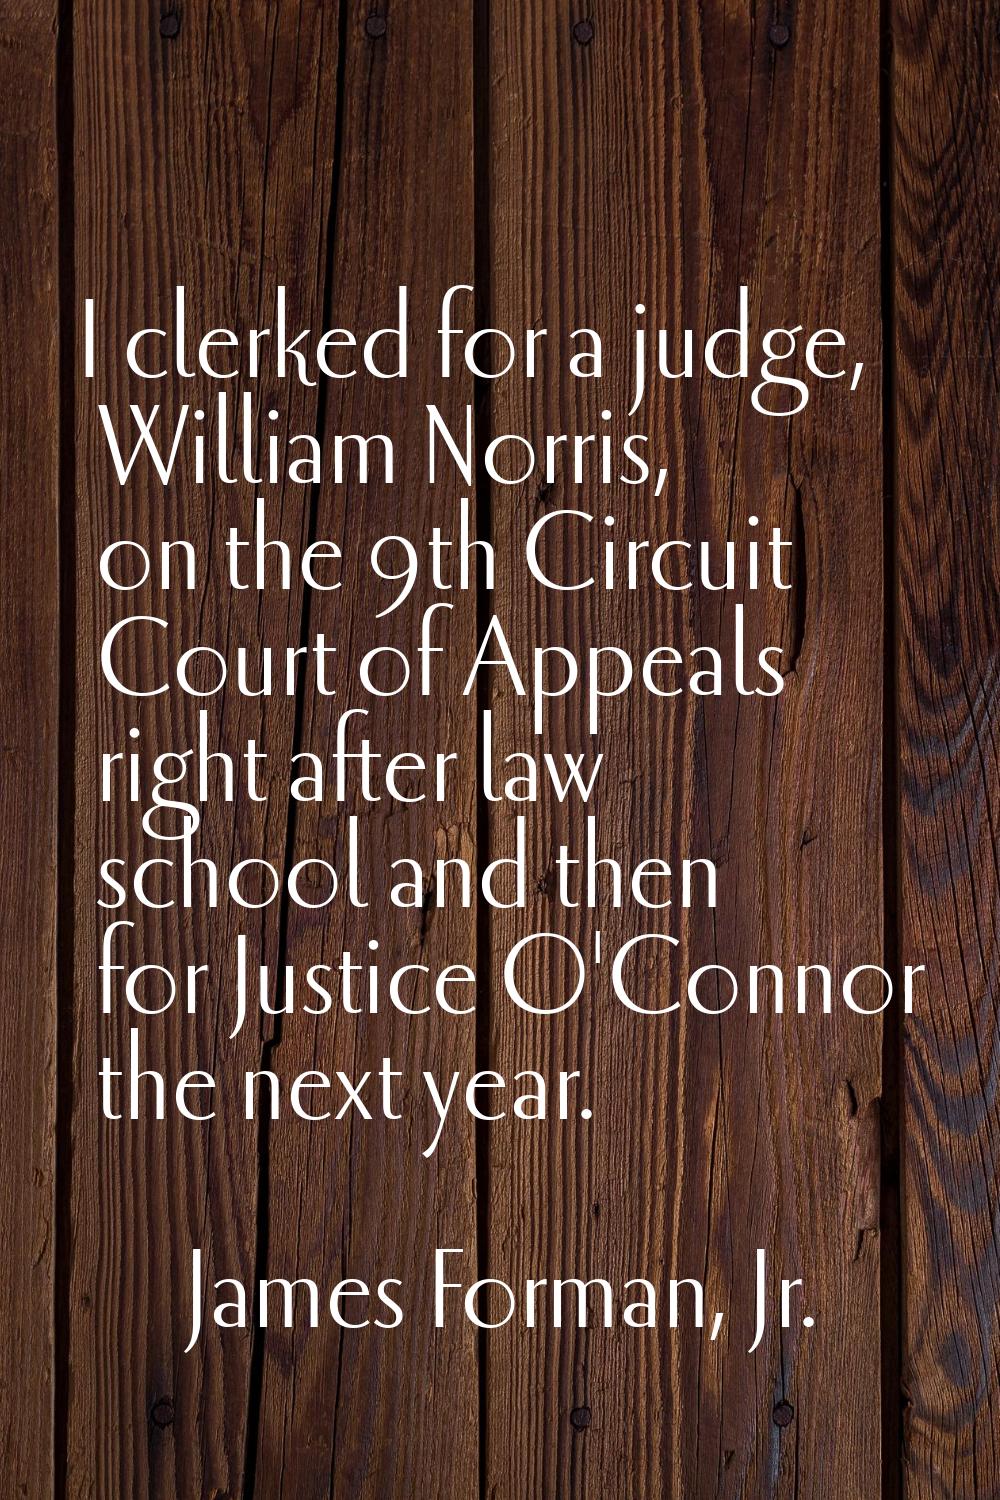 I clerked for a judge, William Norris, on the 9th Circuit Court of Appeals right after law school a